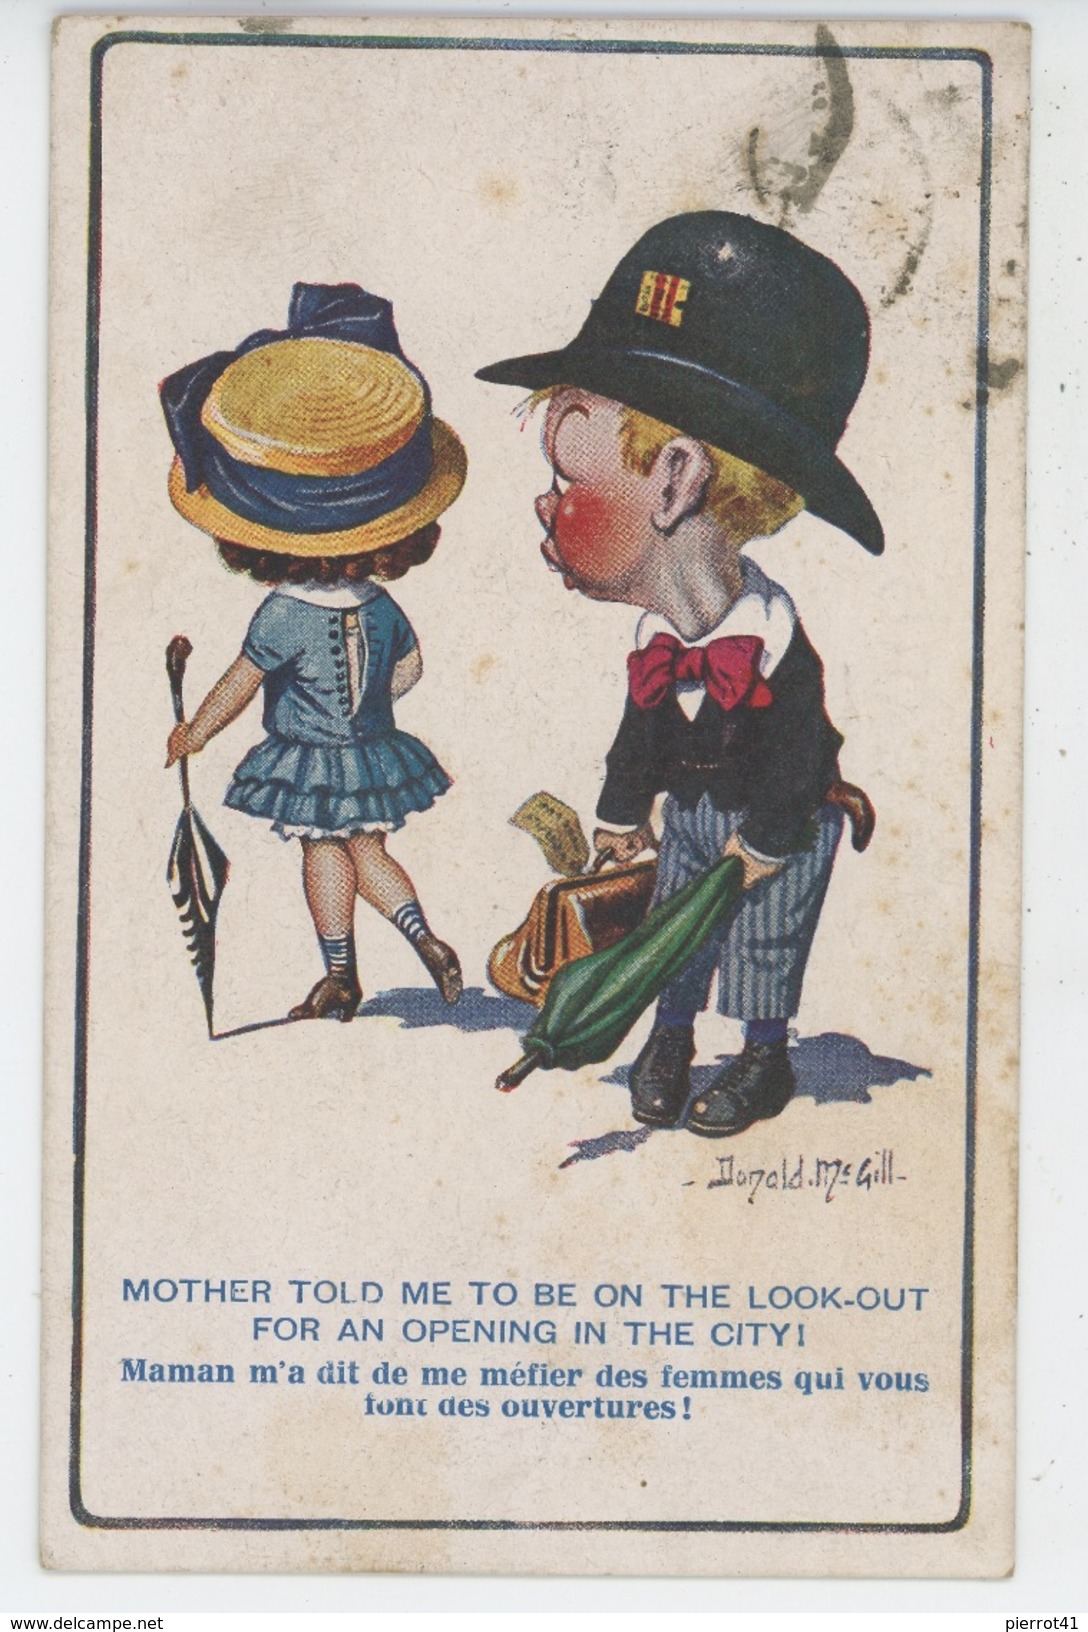 ENFANTS - Jolie Carte Fantaisie Enfants "Mother Told Me To Be On The Look-out For An Opening In.." Signée DONALD MC GILL - Mc Gill, Donald